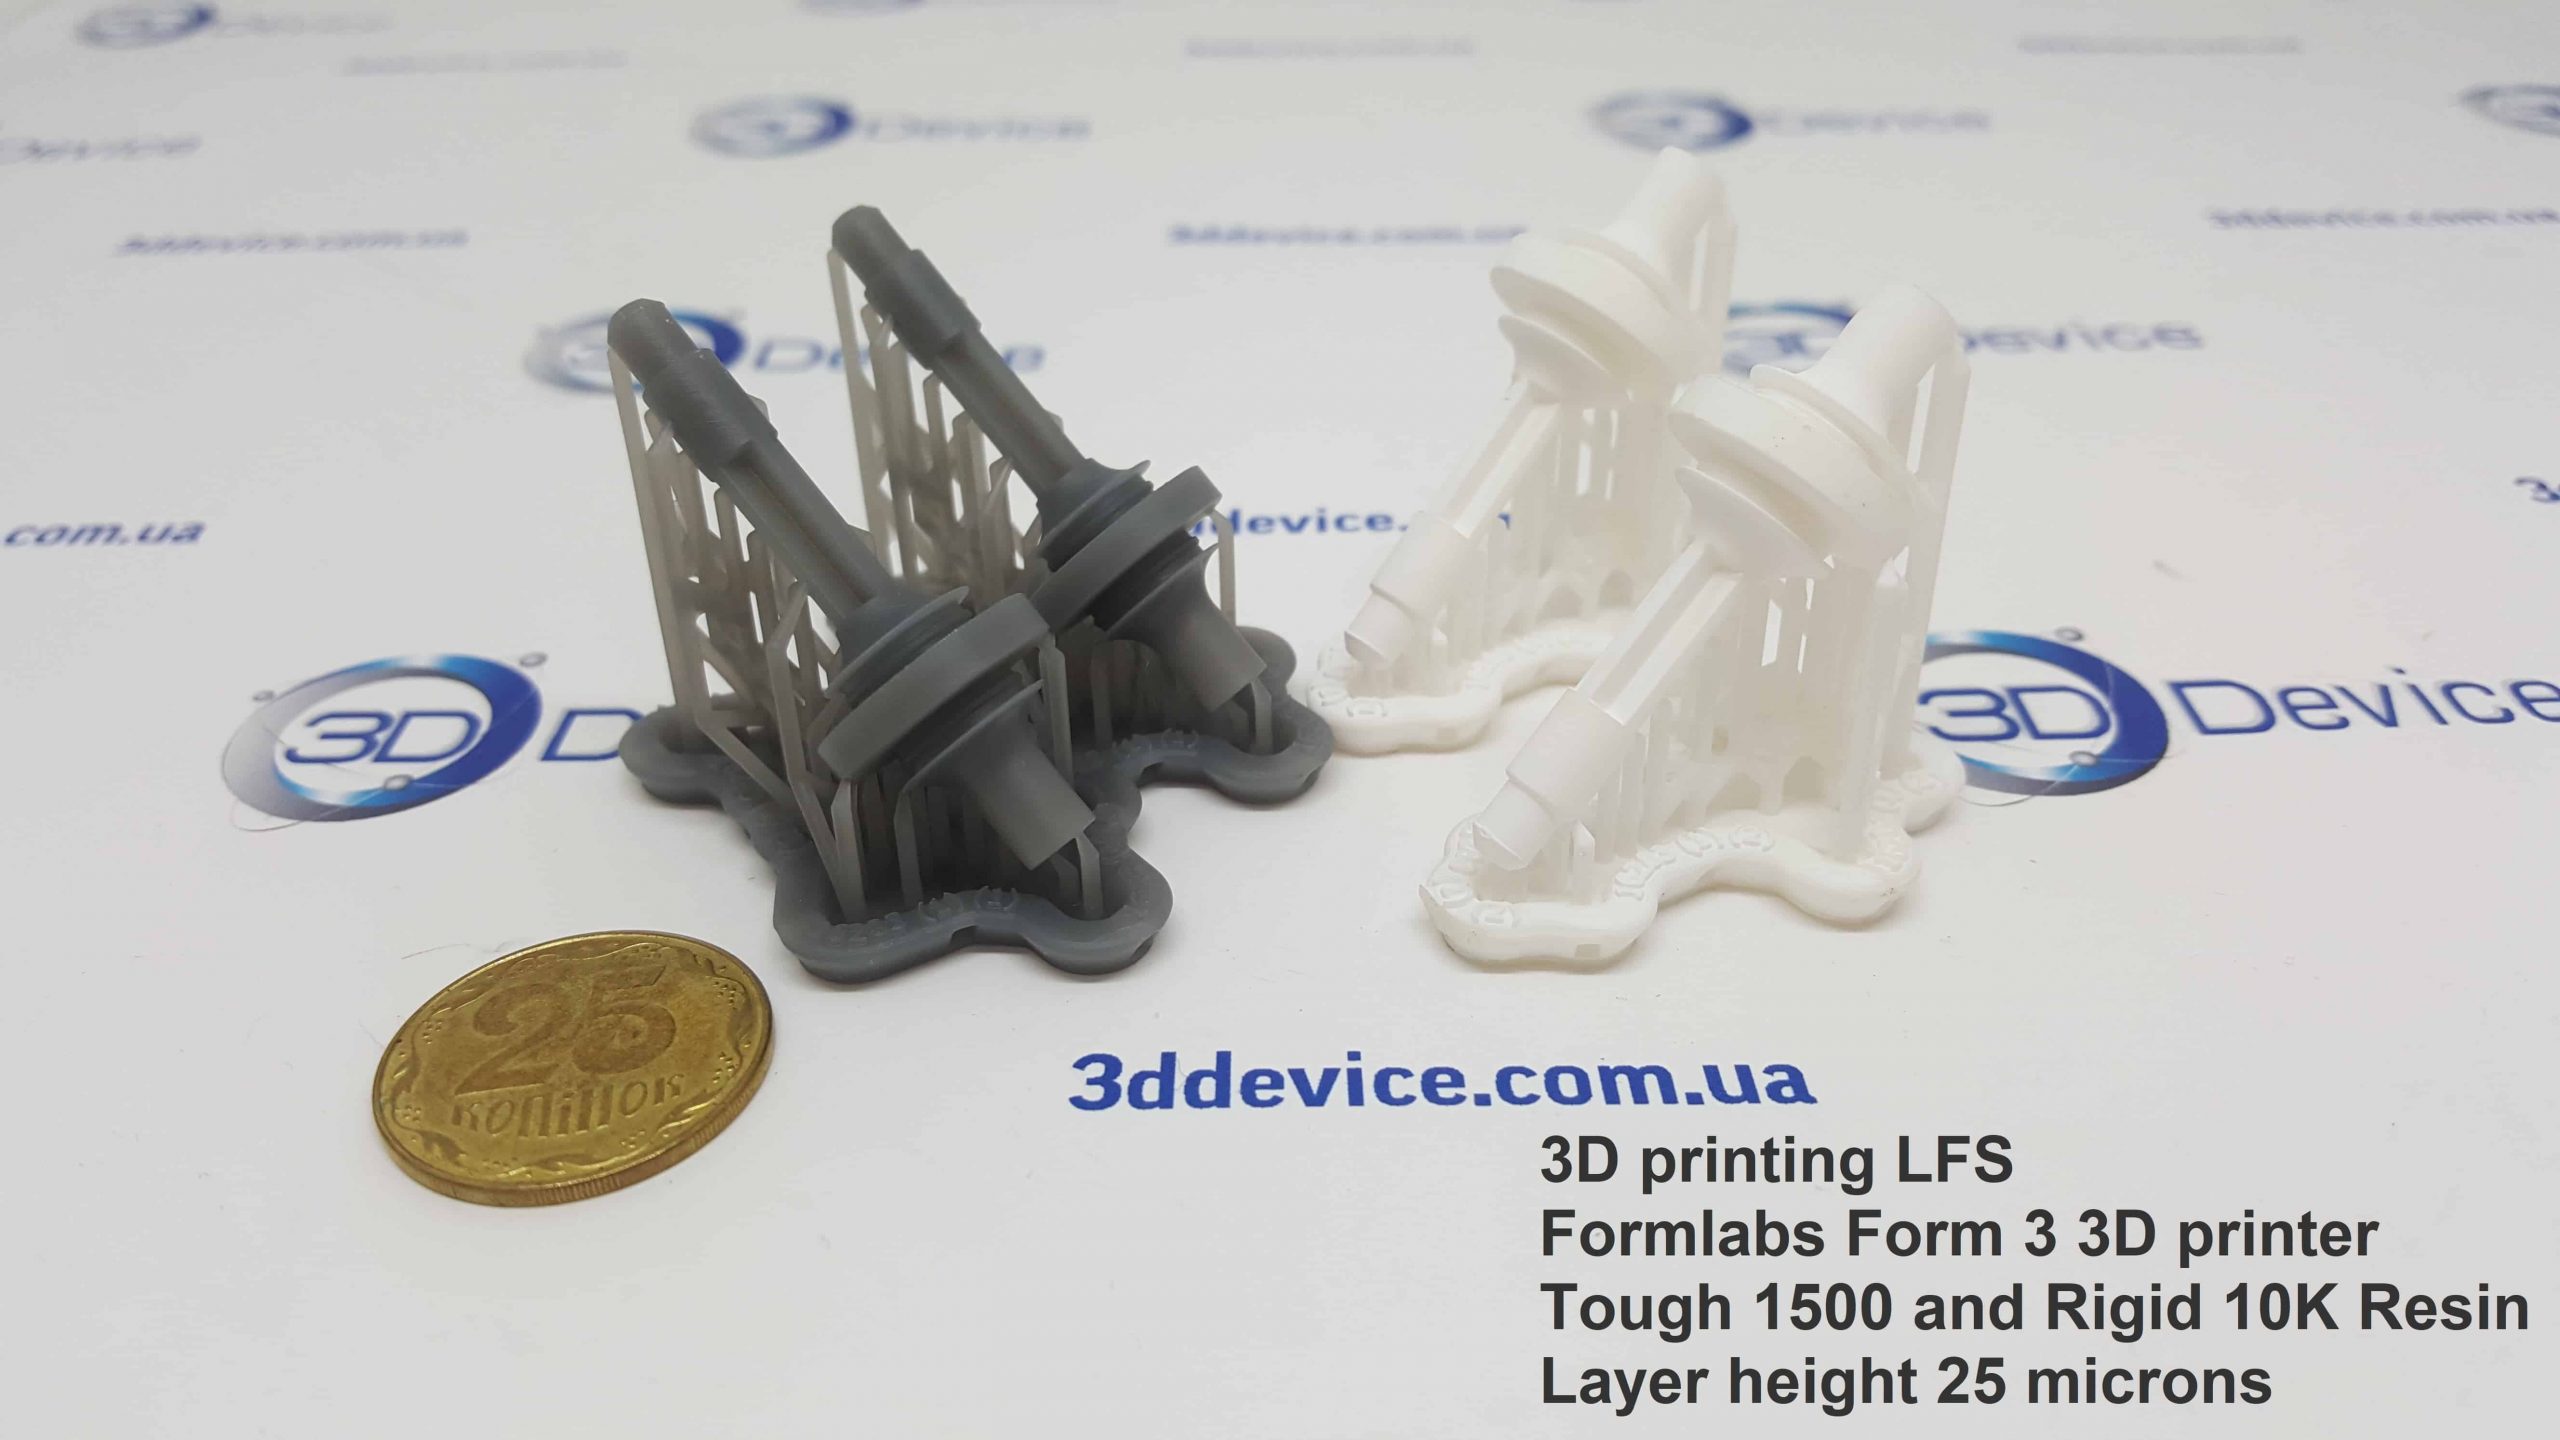 3D print LFS of the valve Formlabs Tough 1500 and Rigid 10K Resin